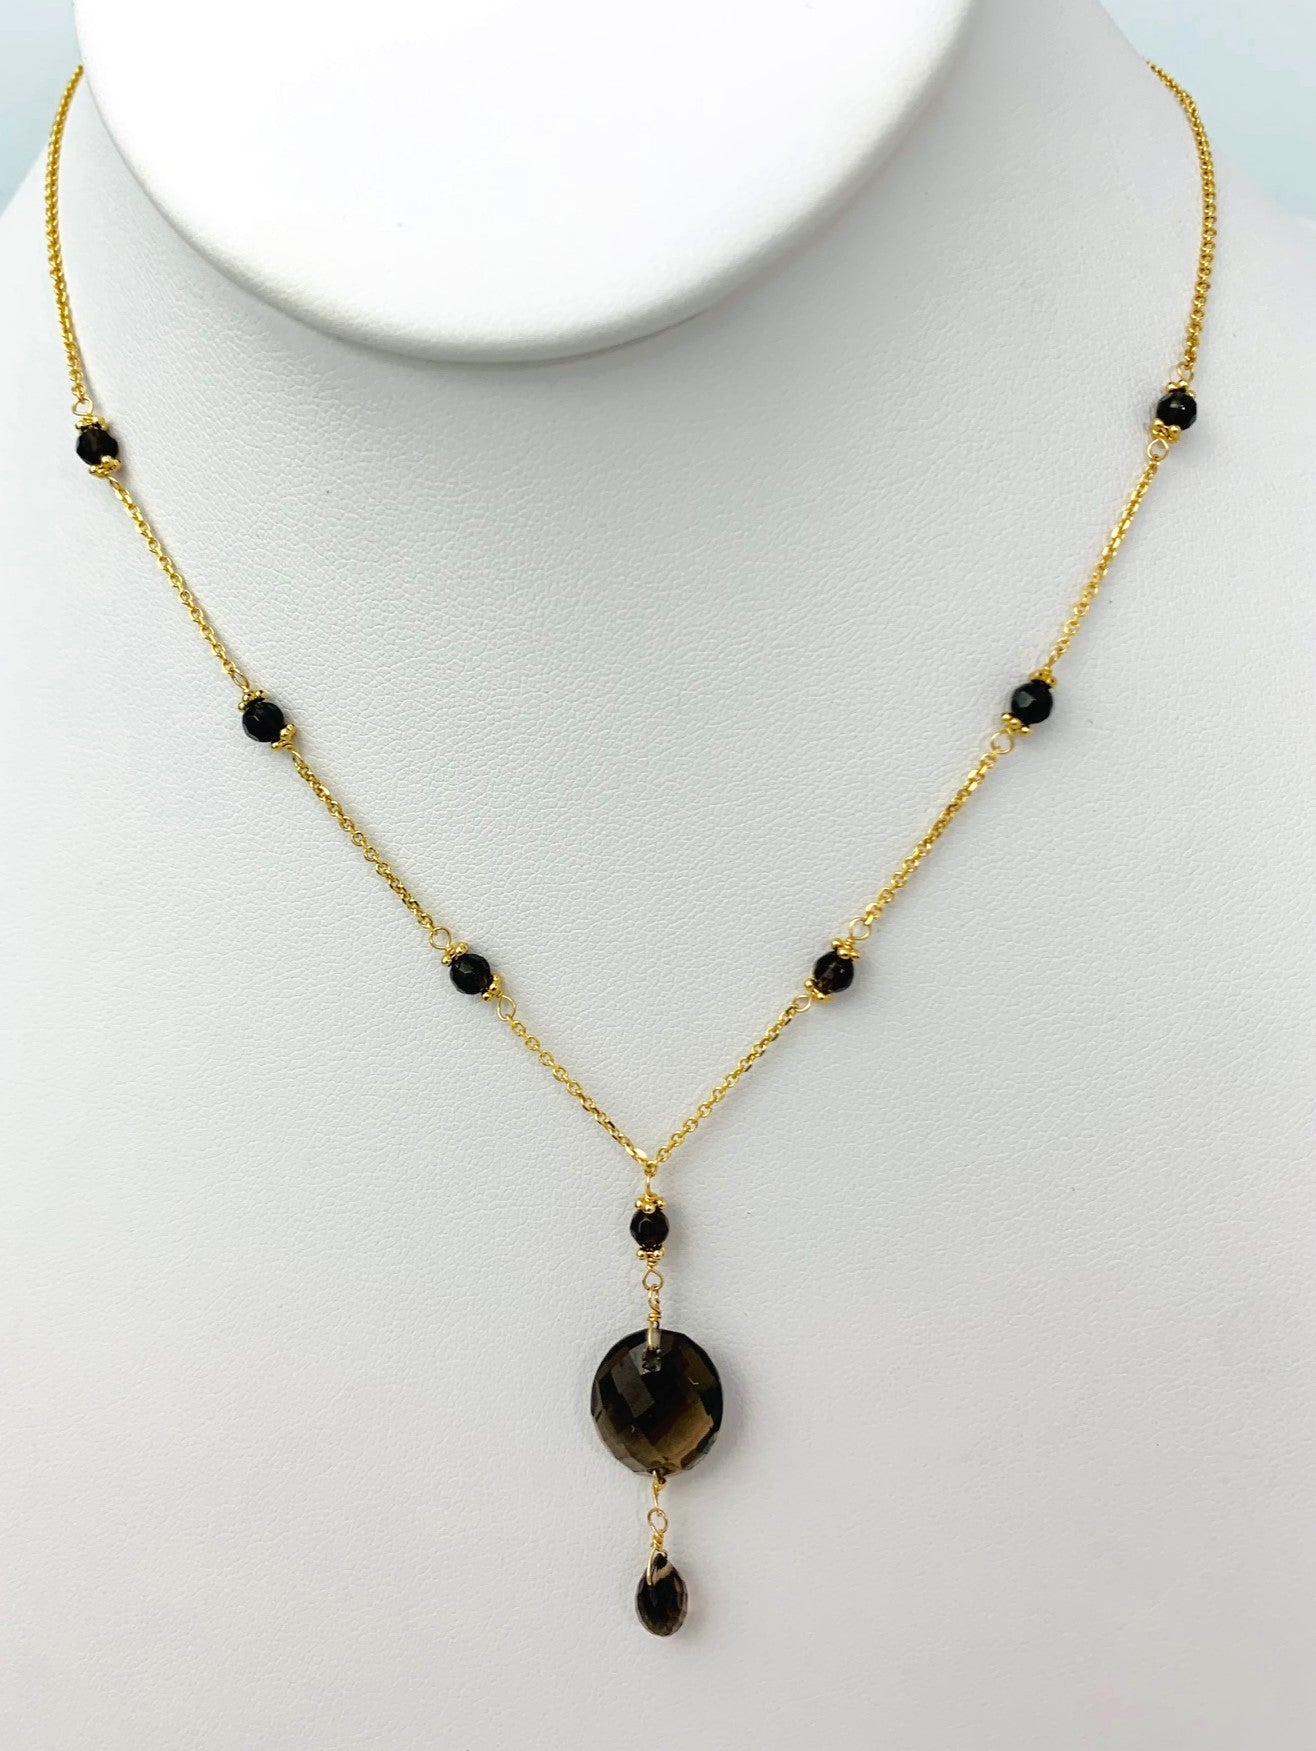 15-16 Inch Smokey Quartz Station Necklace With Oval Checkerboard And Briolette Lariat Drop in 14KY - NCK-358-TNCDRPGM14Y-SQ-16